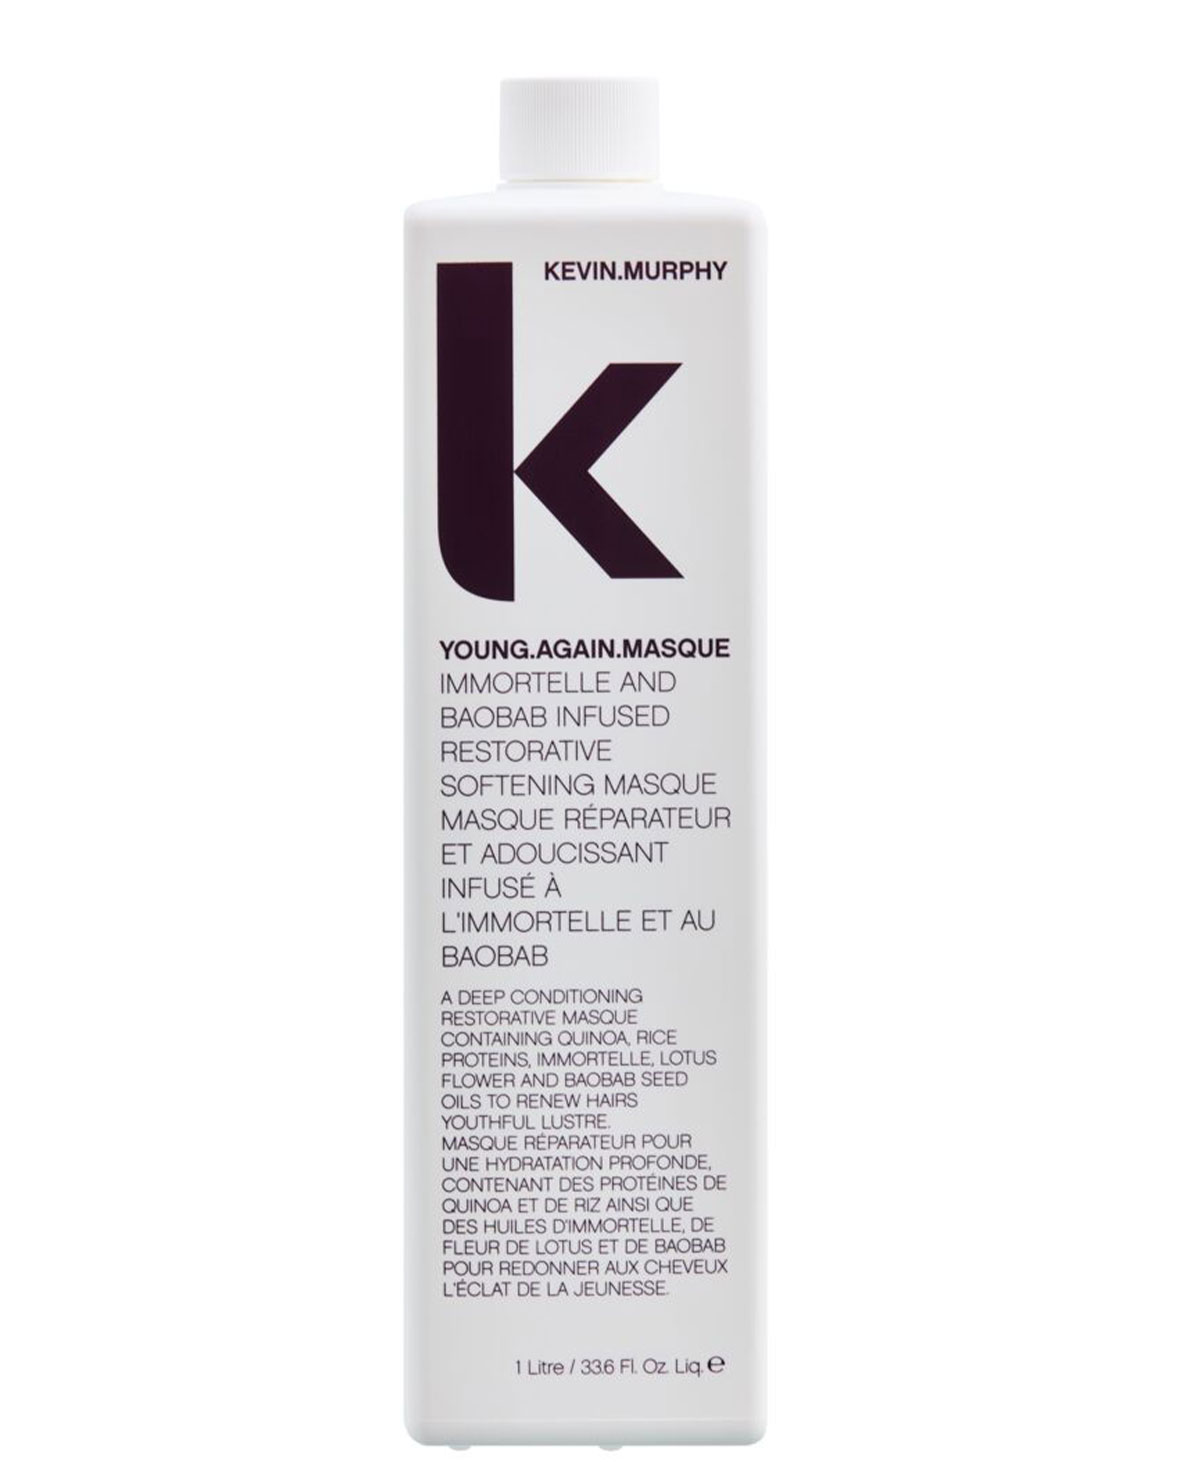 Kevin.Murphy YOUNG.AGAIN.MASQUE 1000ml